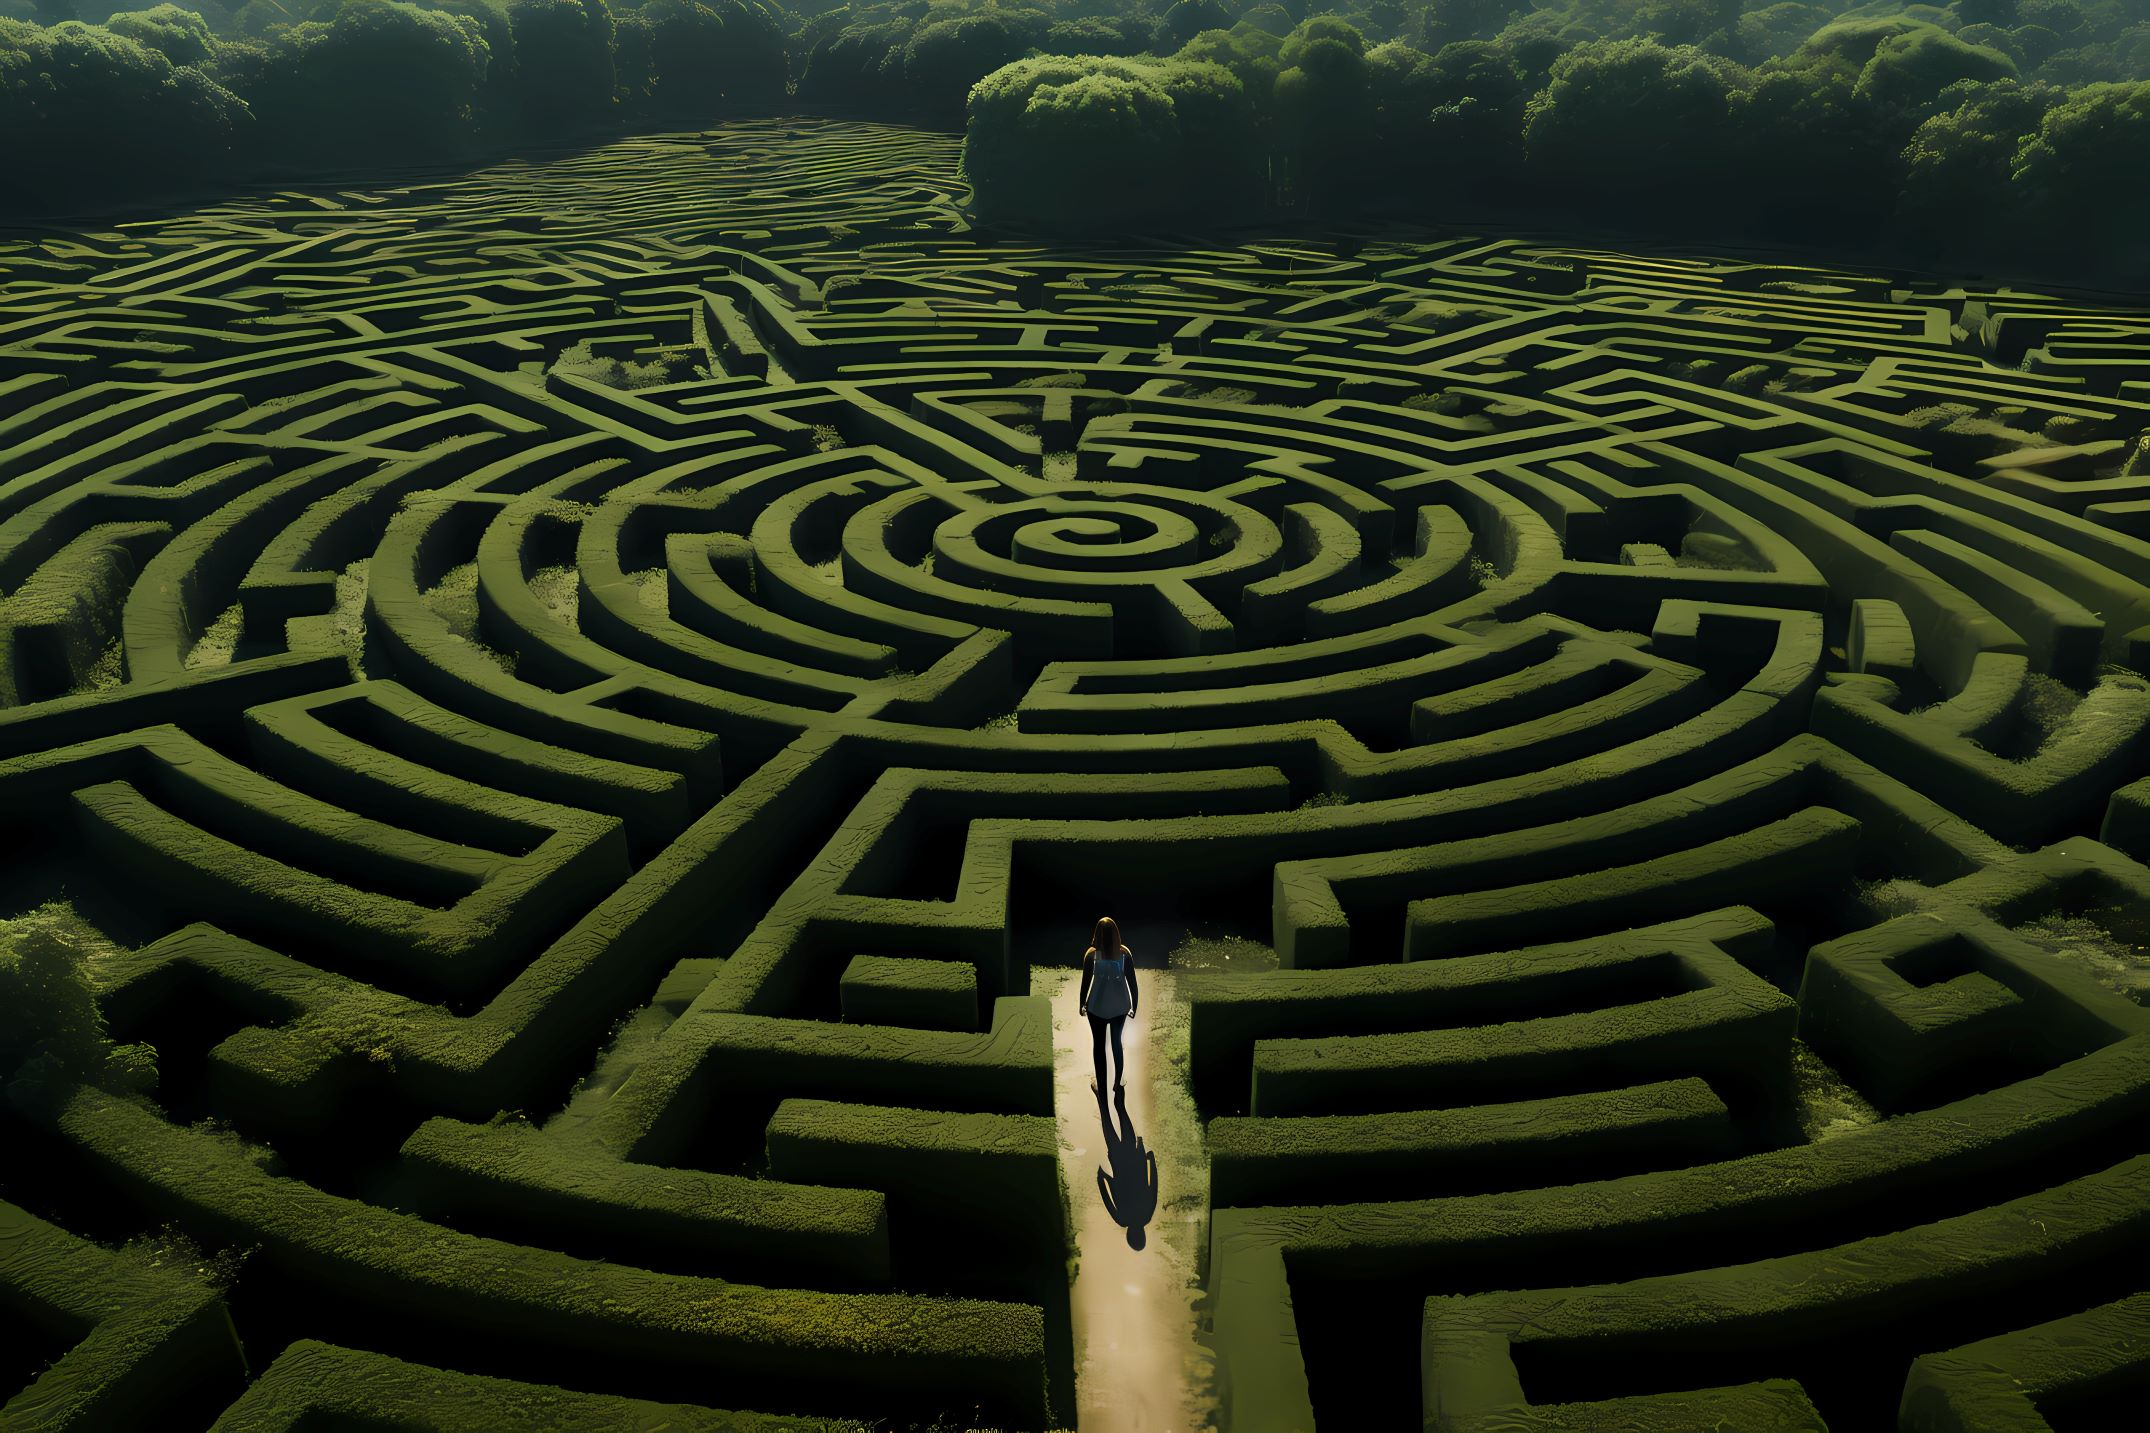 Life's a maze without goals